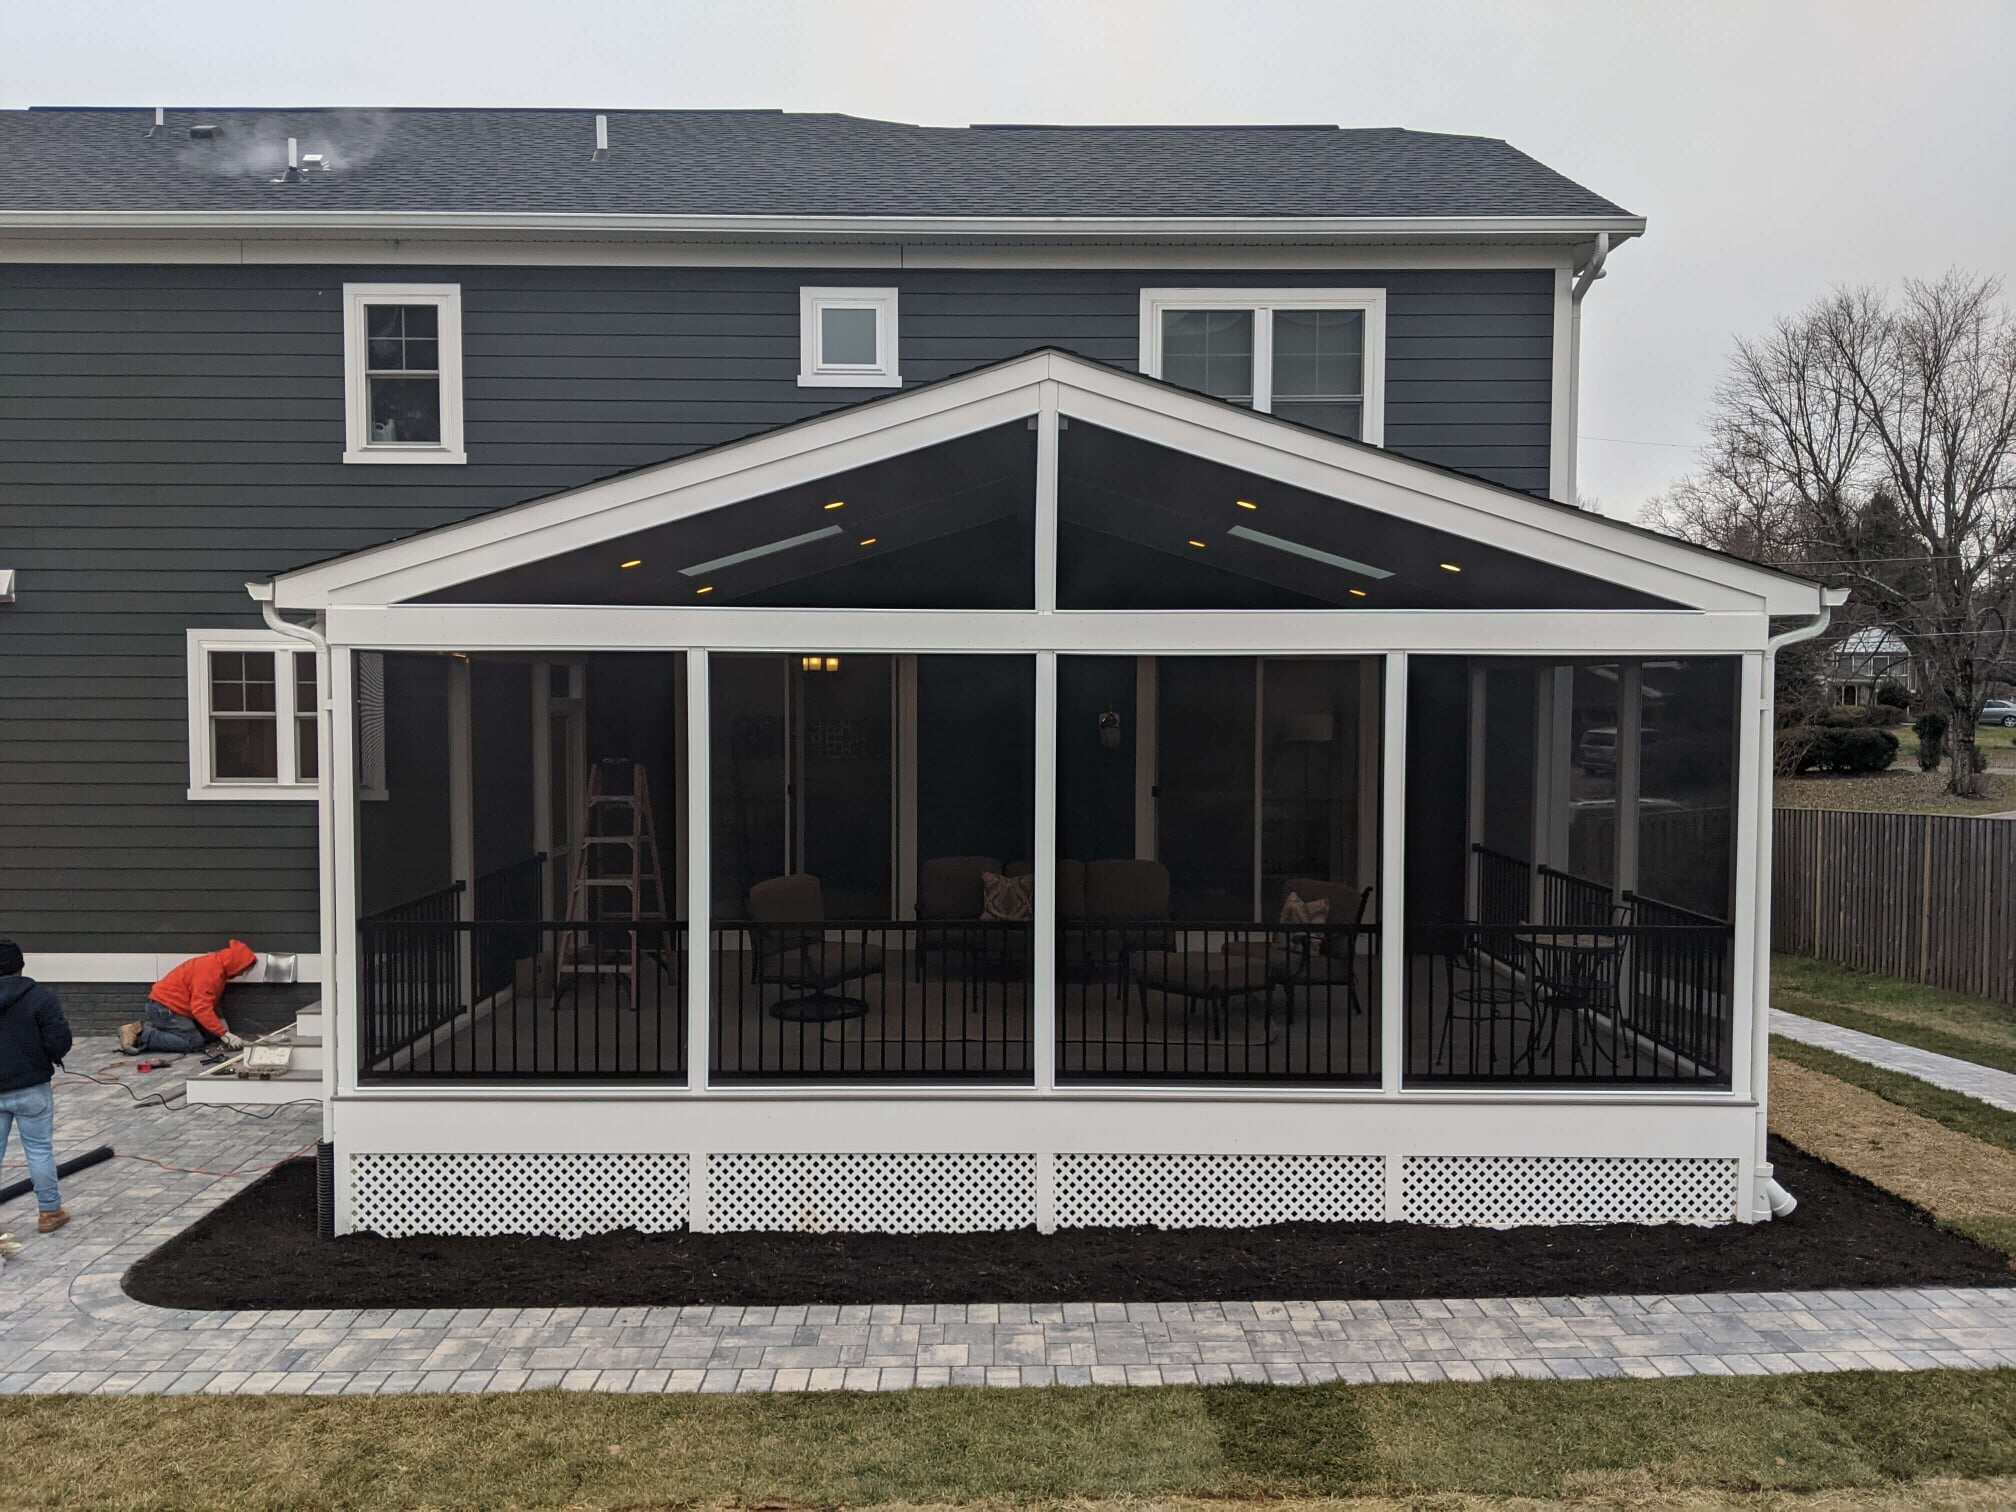 How To Install Screen On Porch